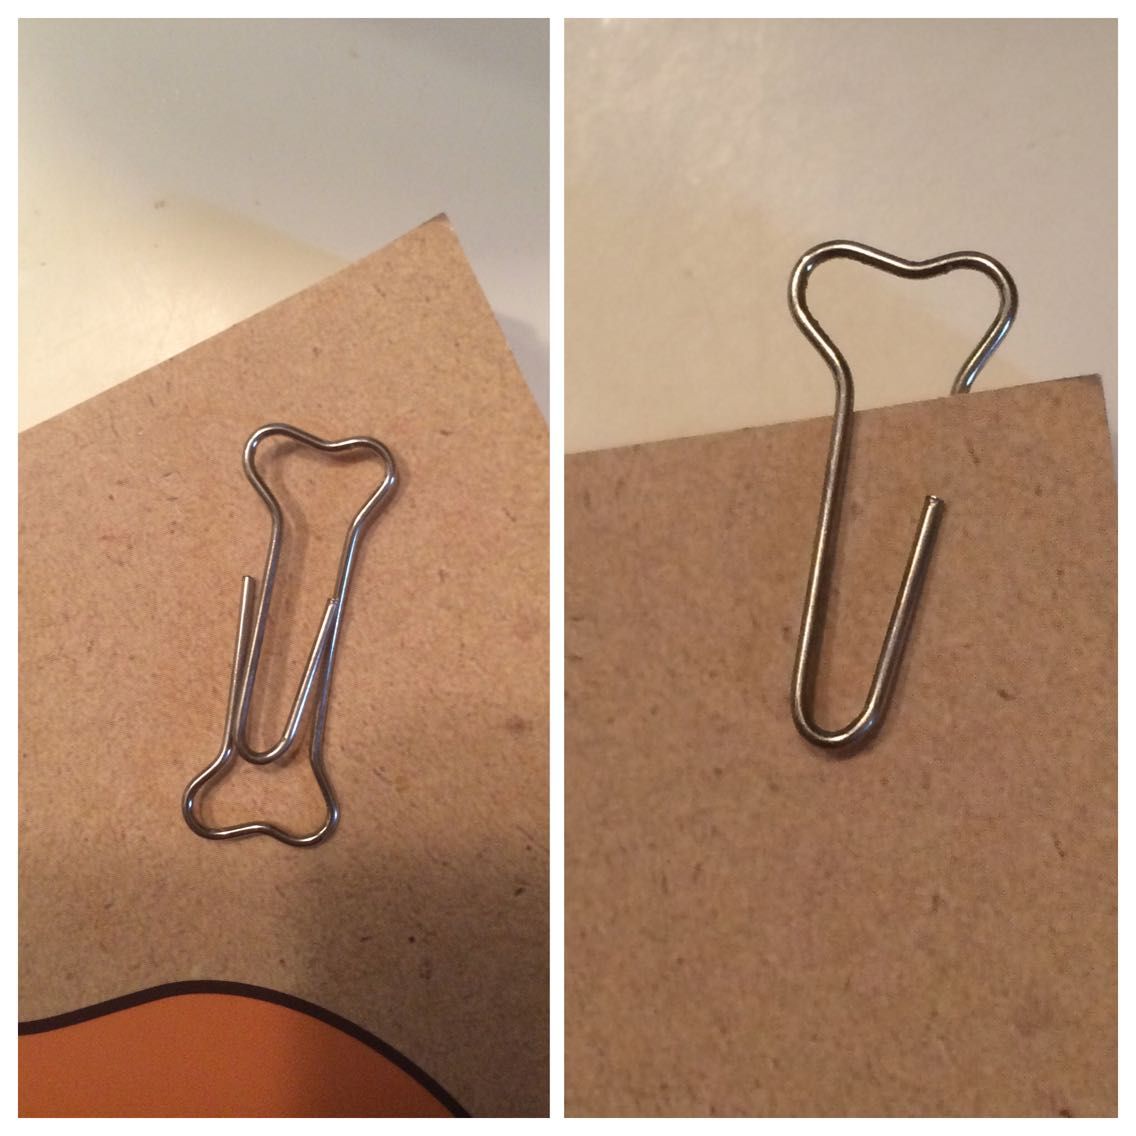 My husband works at an animal hospital and they just ordered these new paperclips.